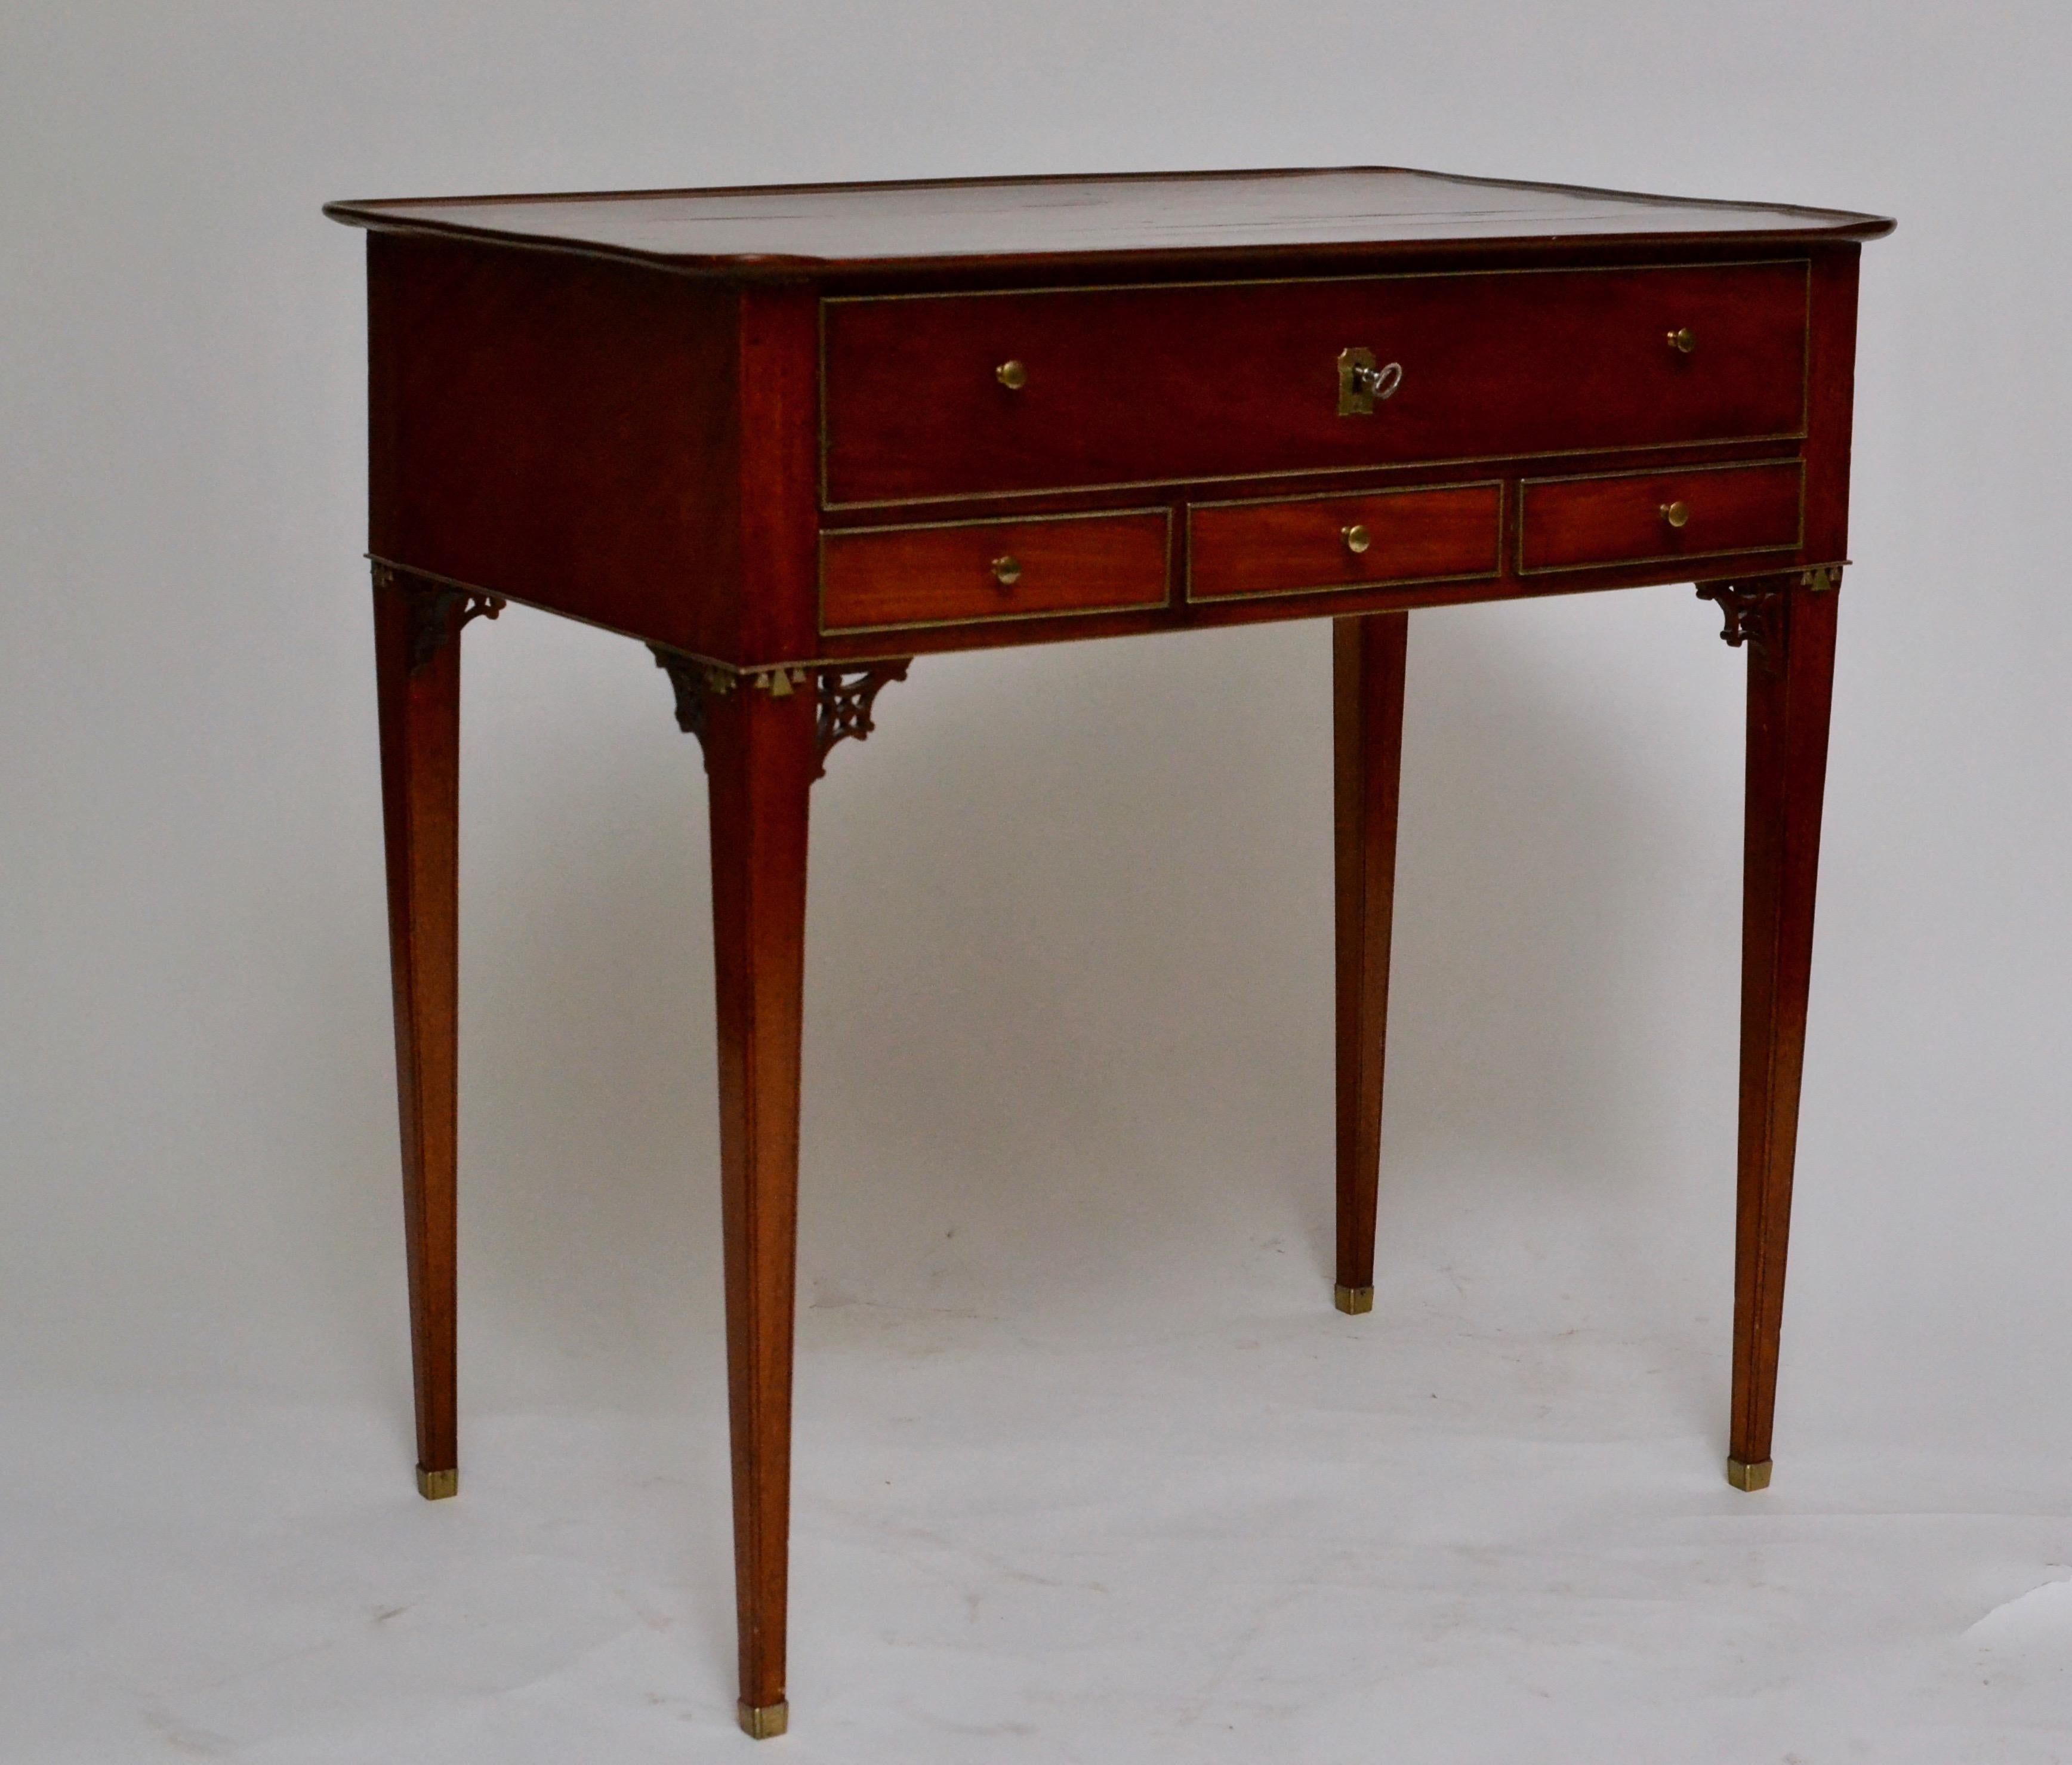 A small Swedish gustavian ladies working mahogany table with drawers. Attributed to Carl Diedric Fick (master1776-1806). Made in Stockholm, circa 1790.